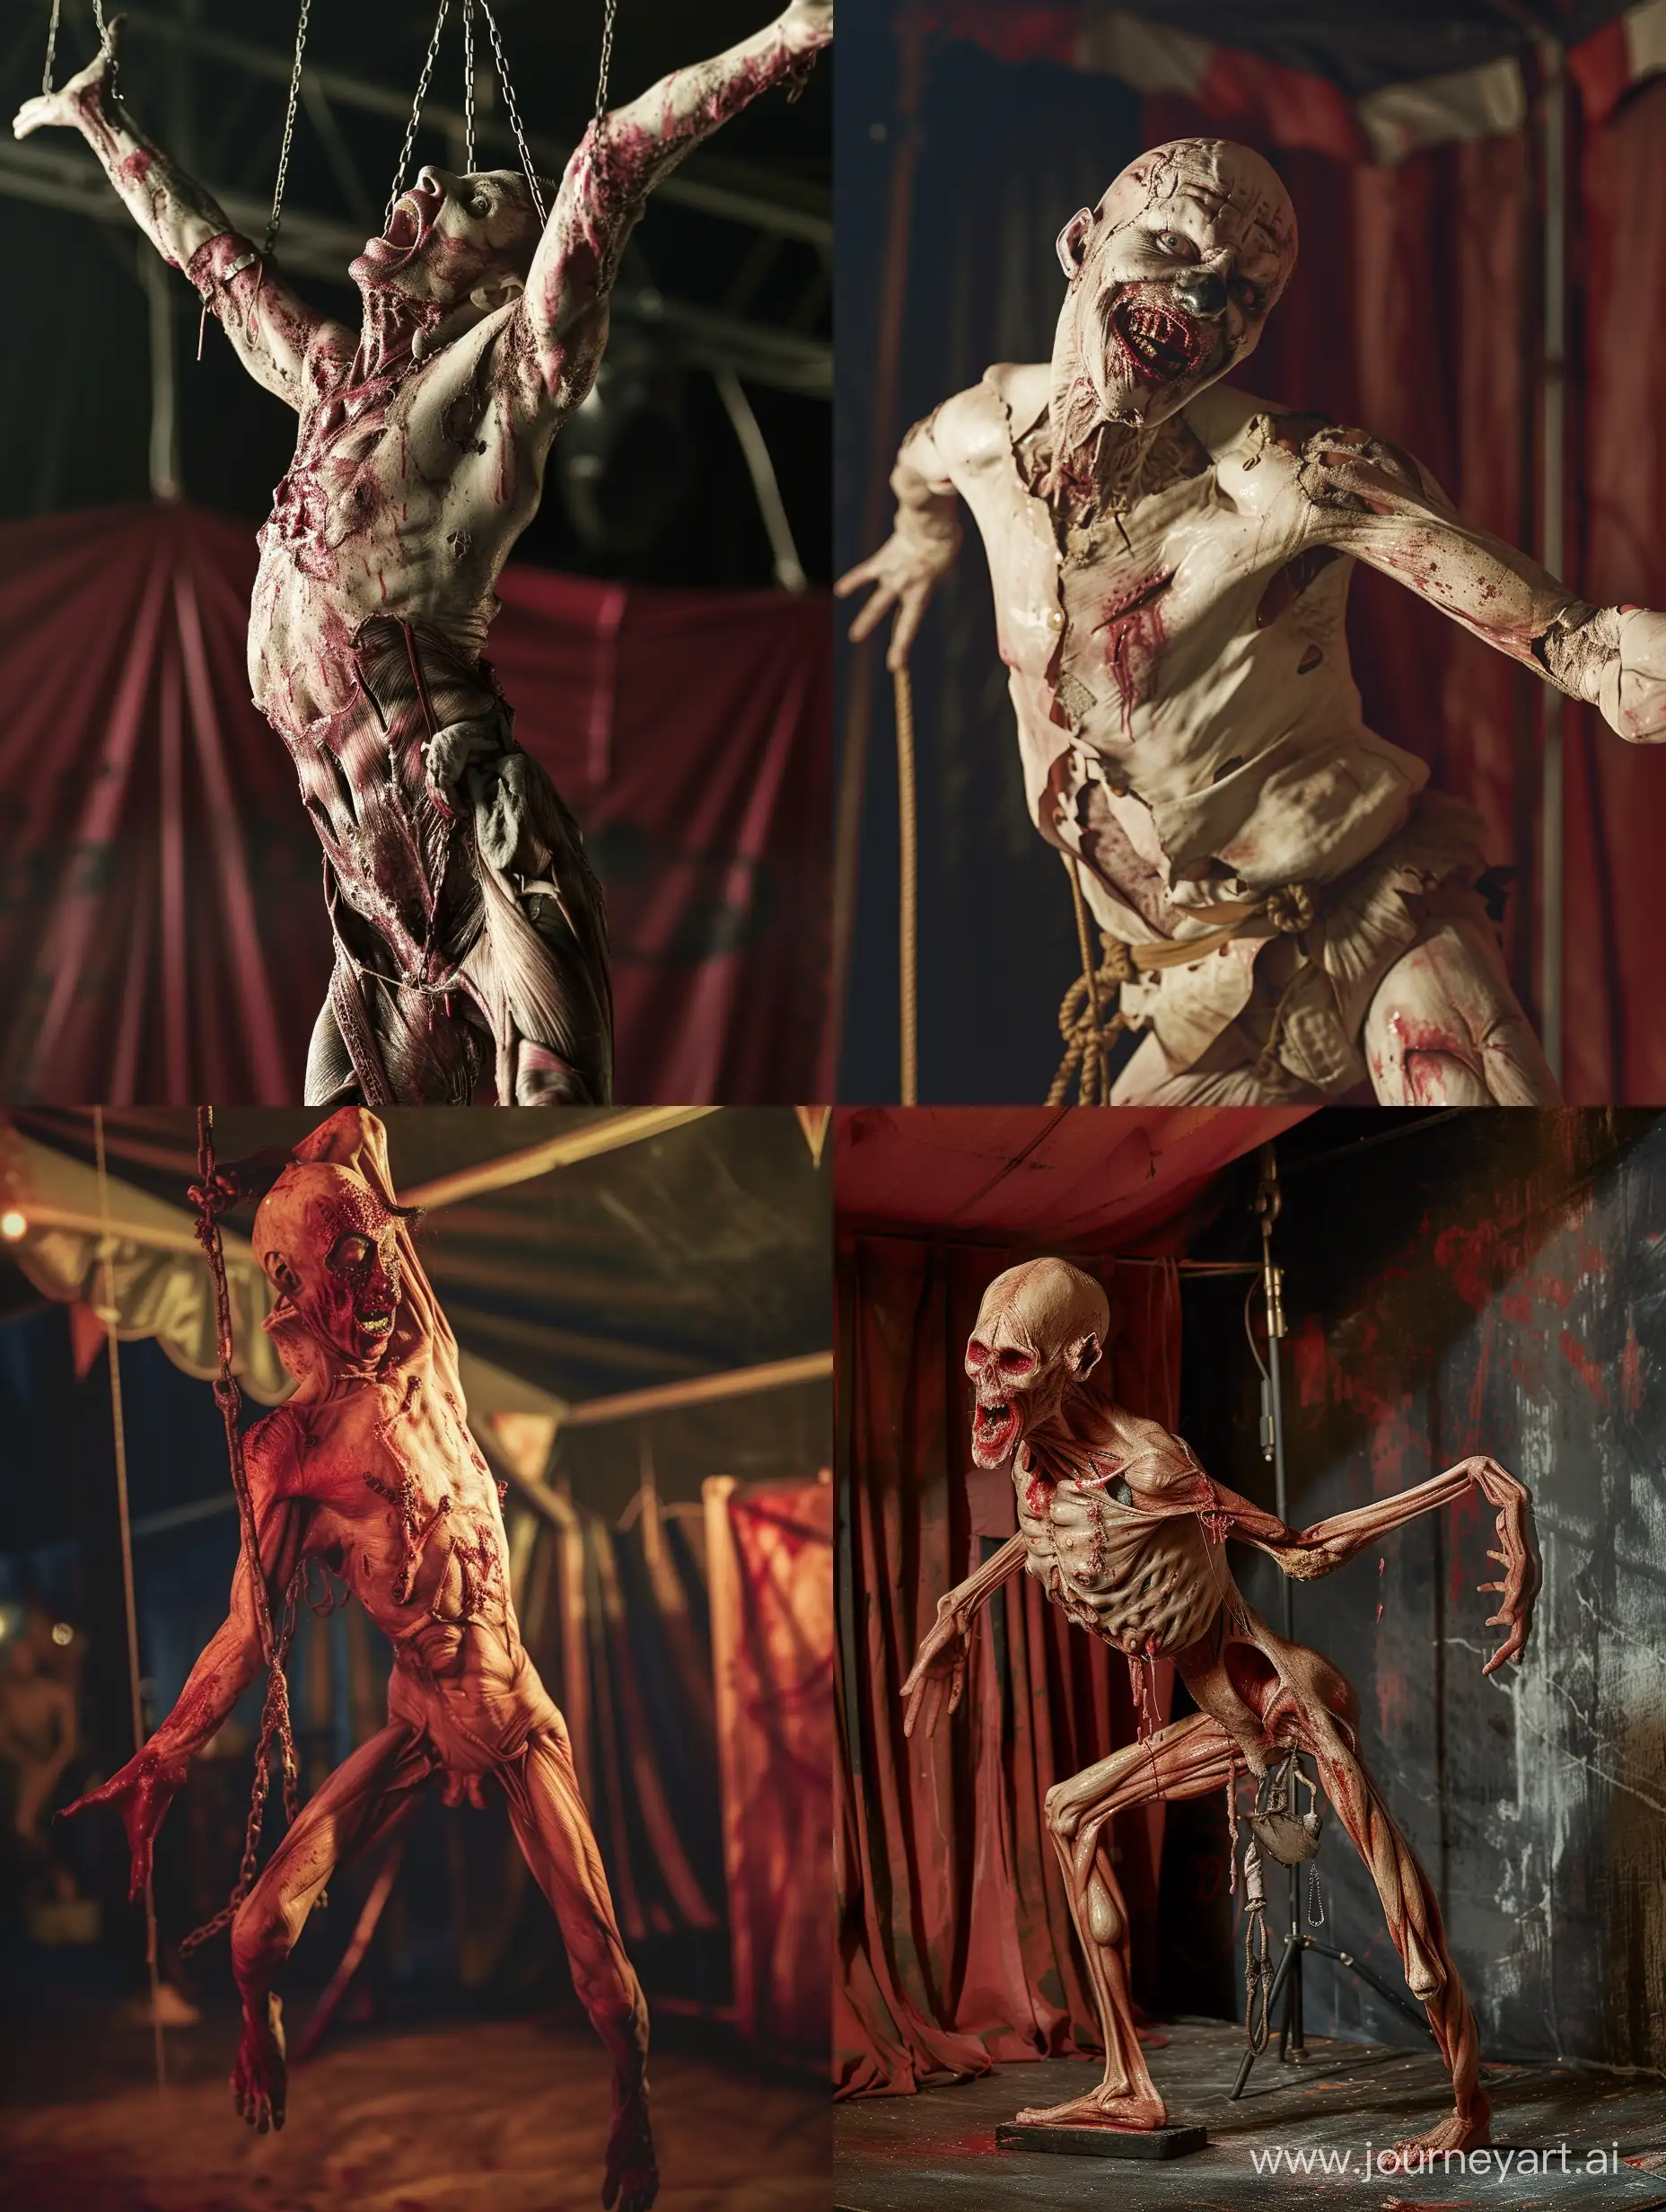 Grotesque-Body-Horror-Circus-Performers-Shocking-and-Twisted-Entertainment